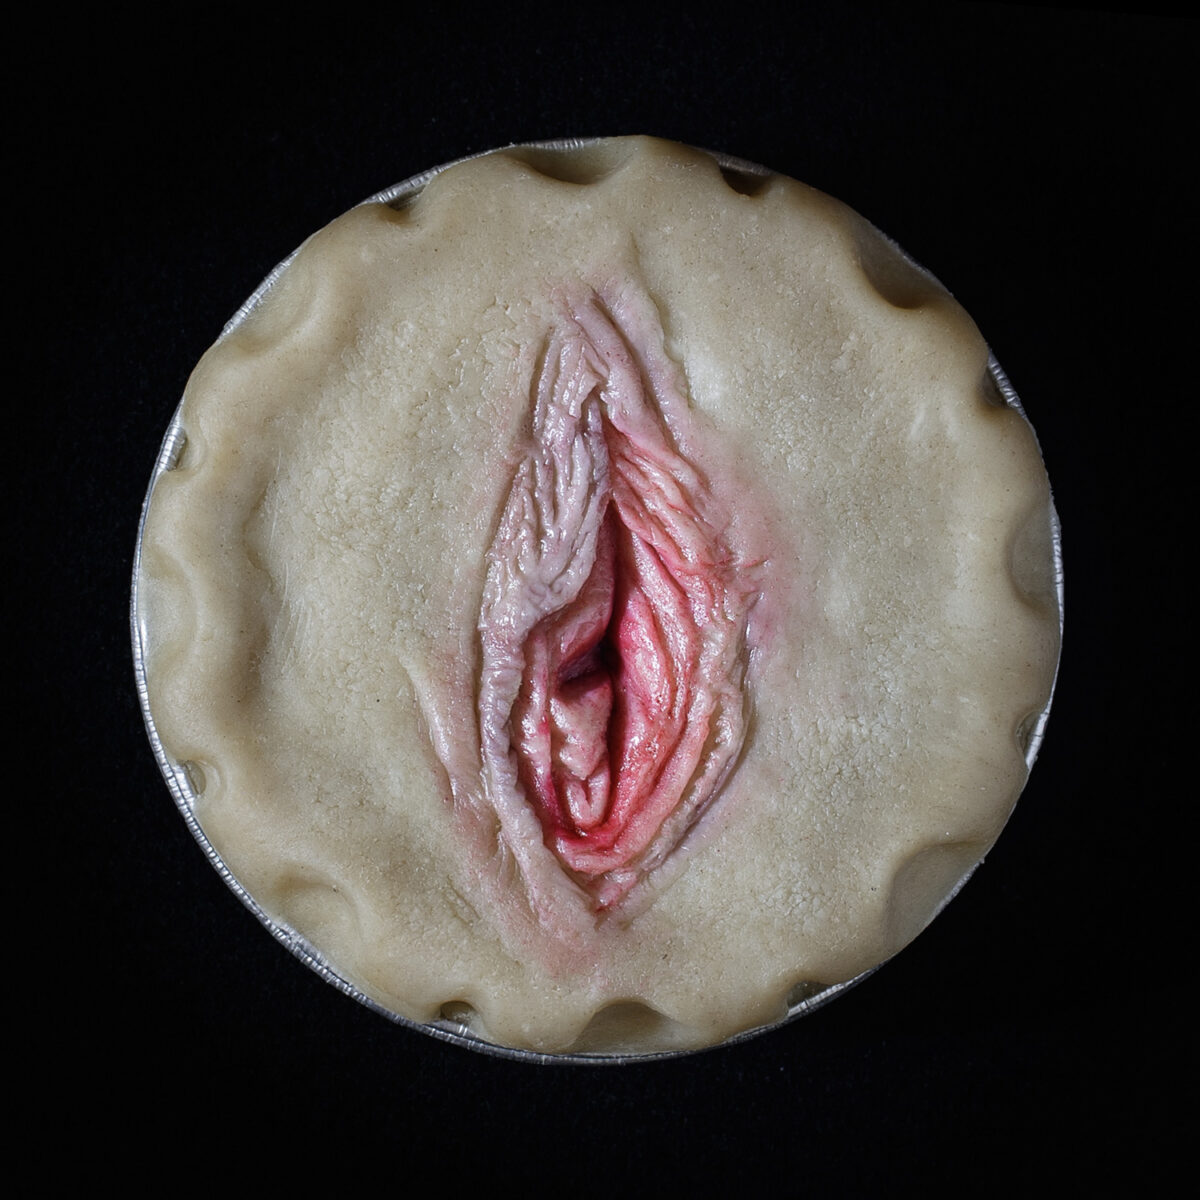 Unbaked vulva pie on a black background. The pie art features a realistic vulva painted with edible paint.